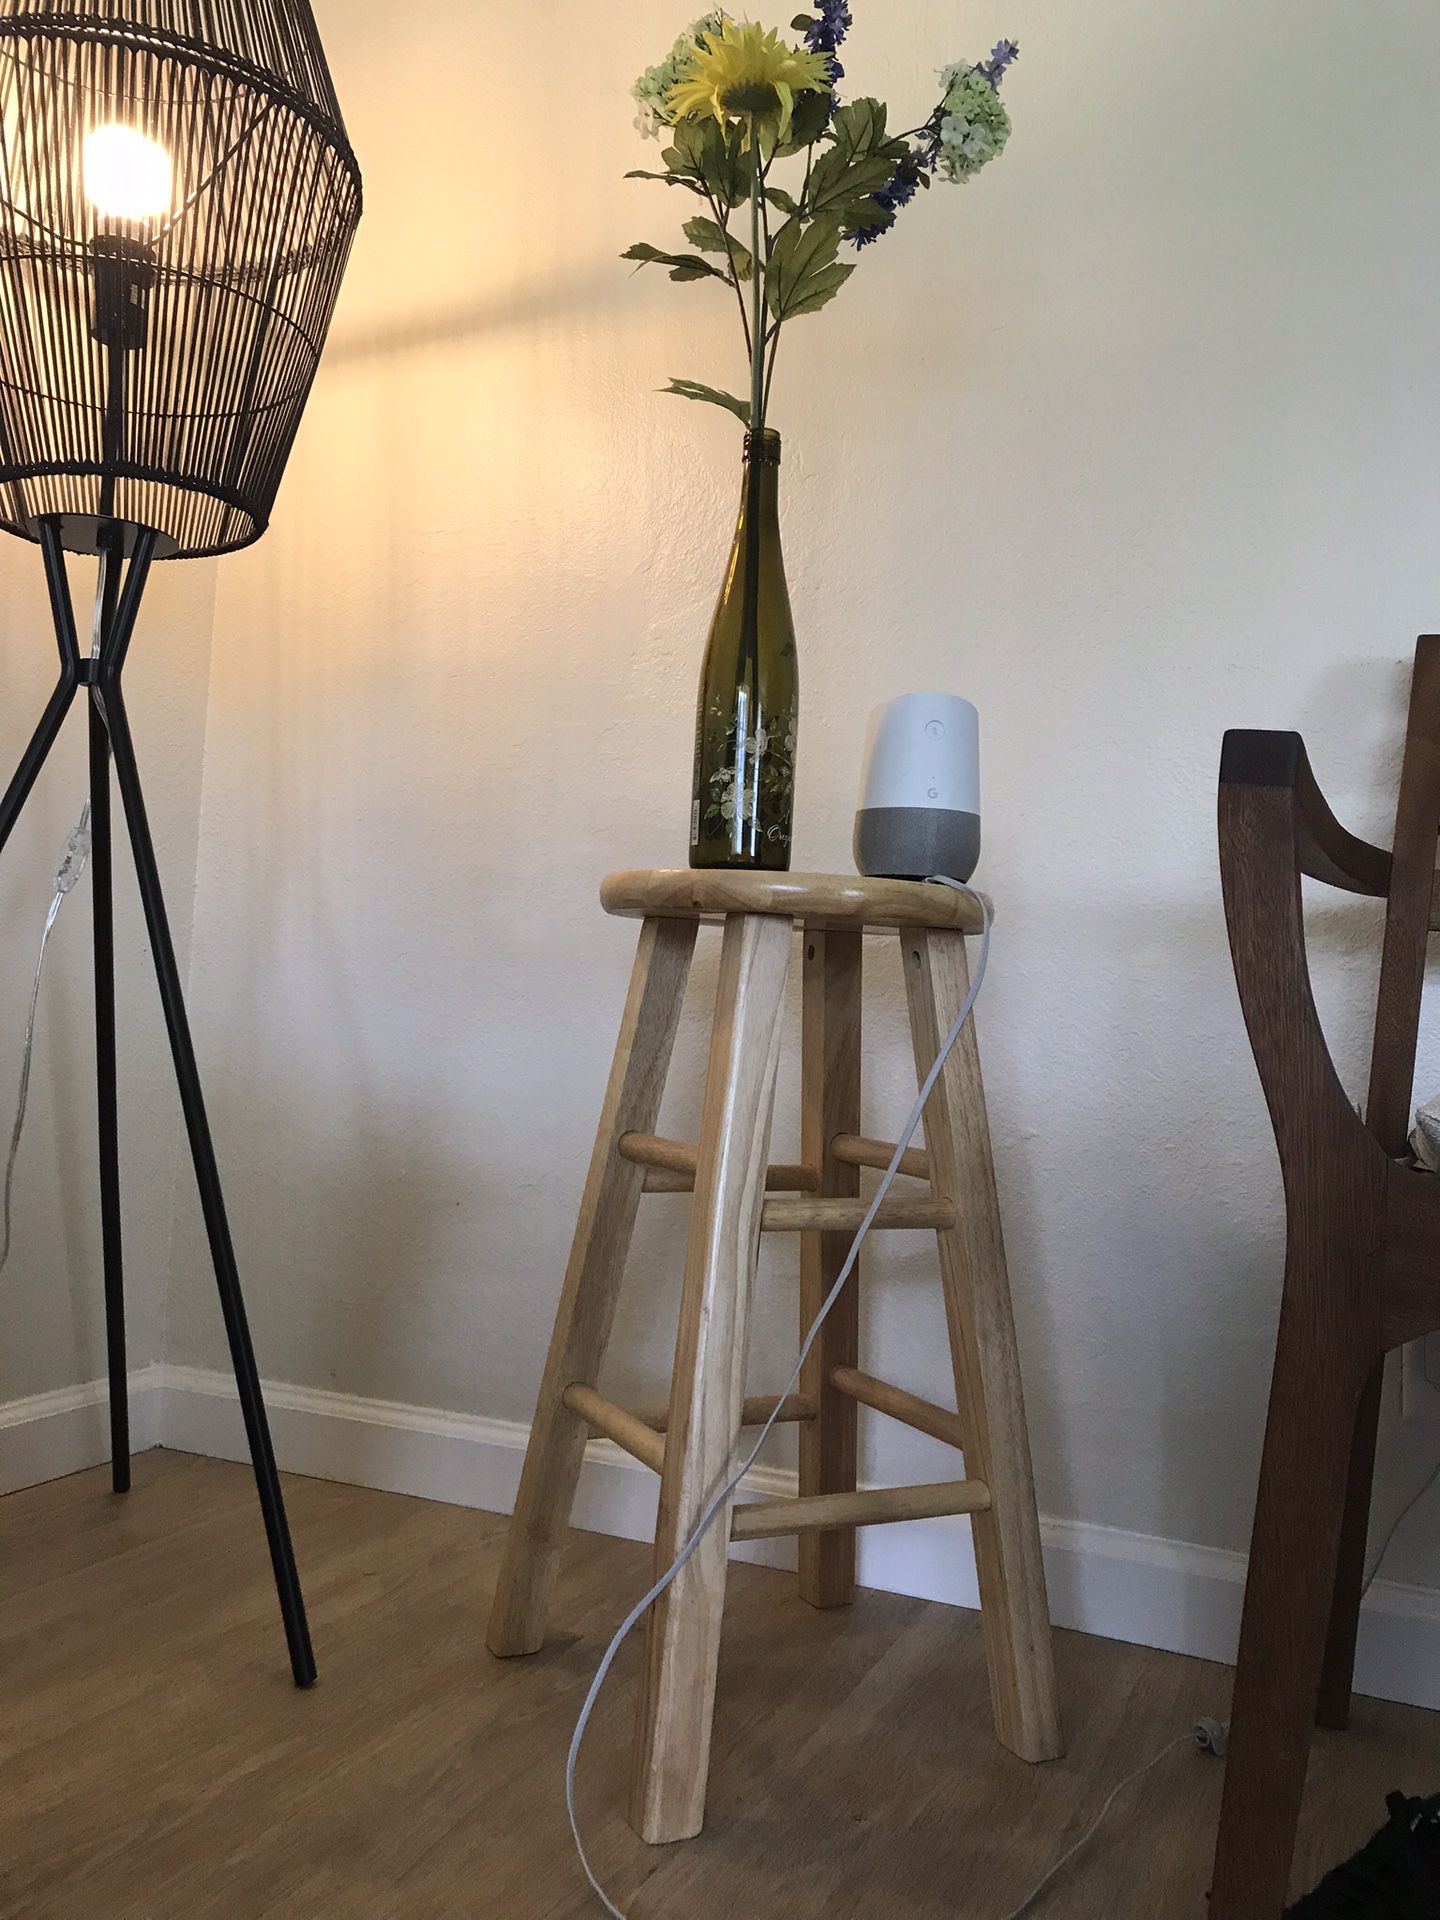 Two Wooden multipurpose stools